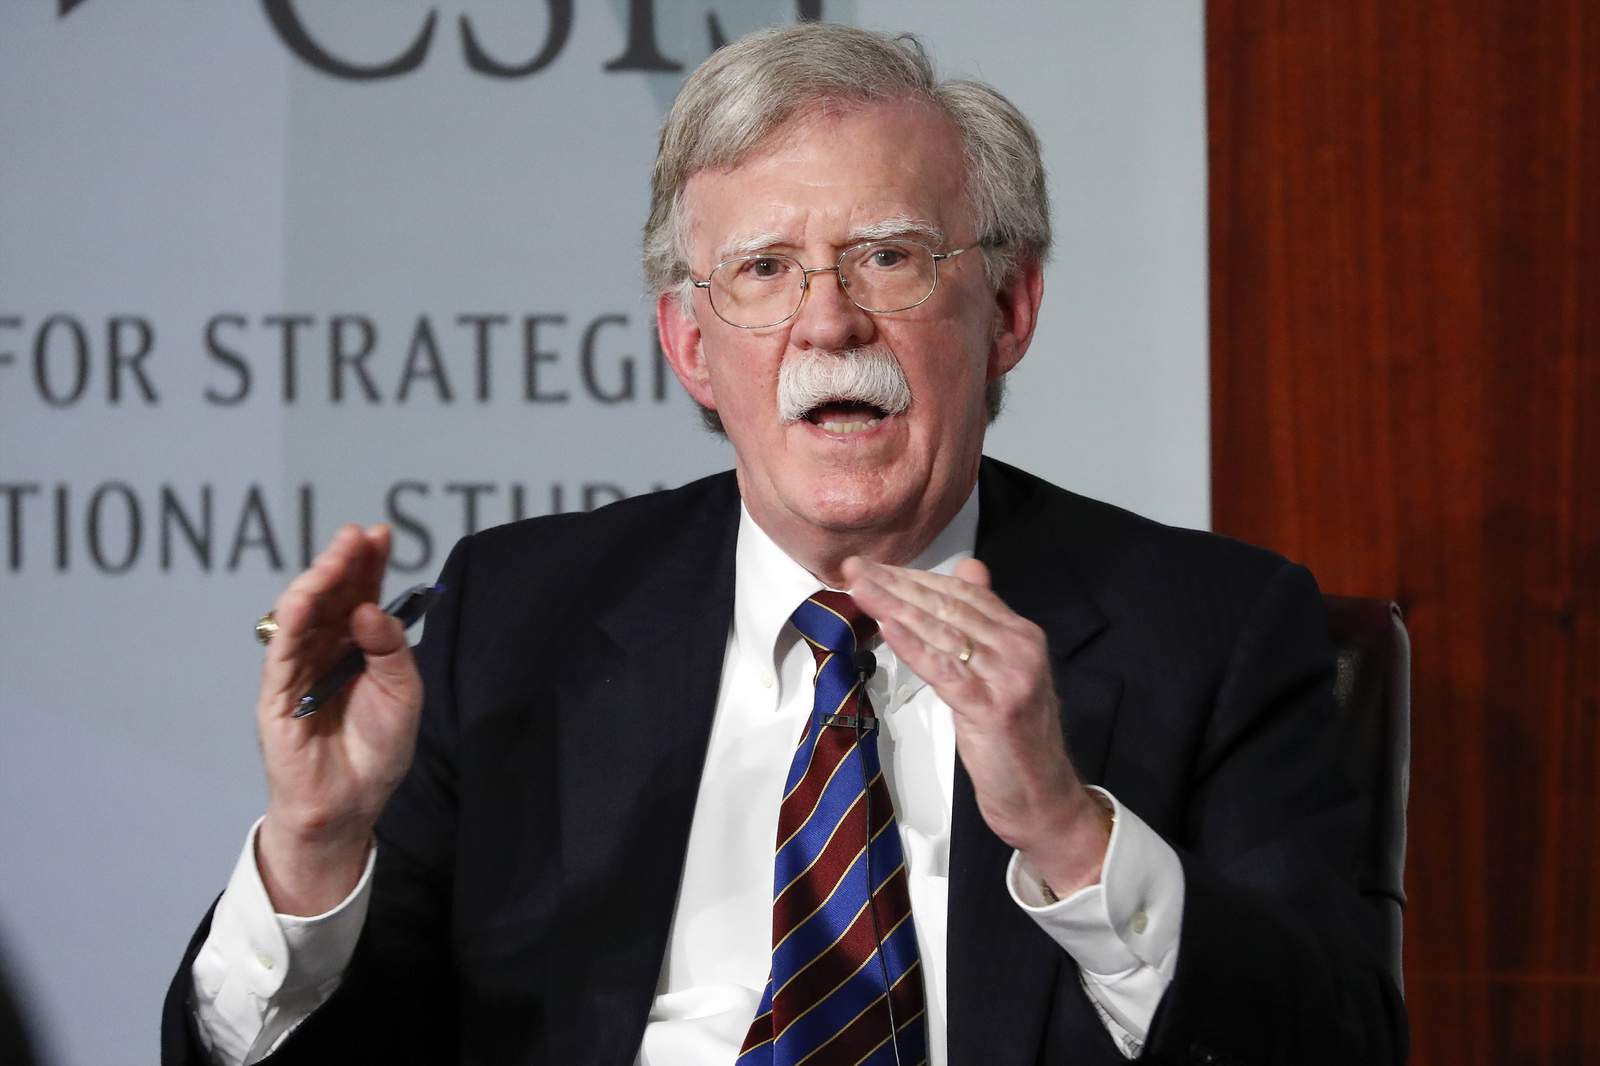 Bolton says Trump asked China to help him get reelected